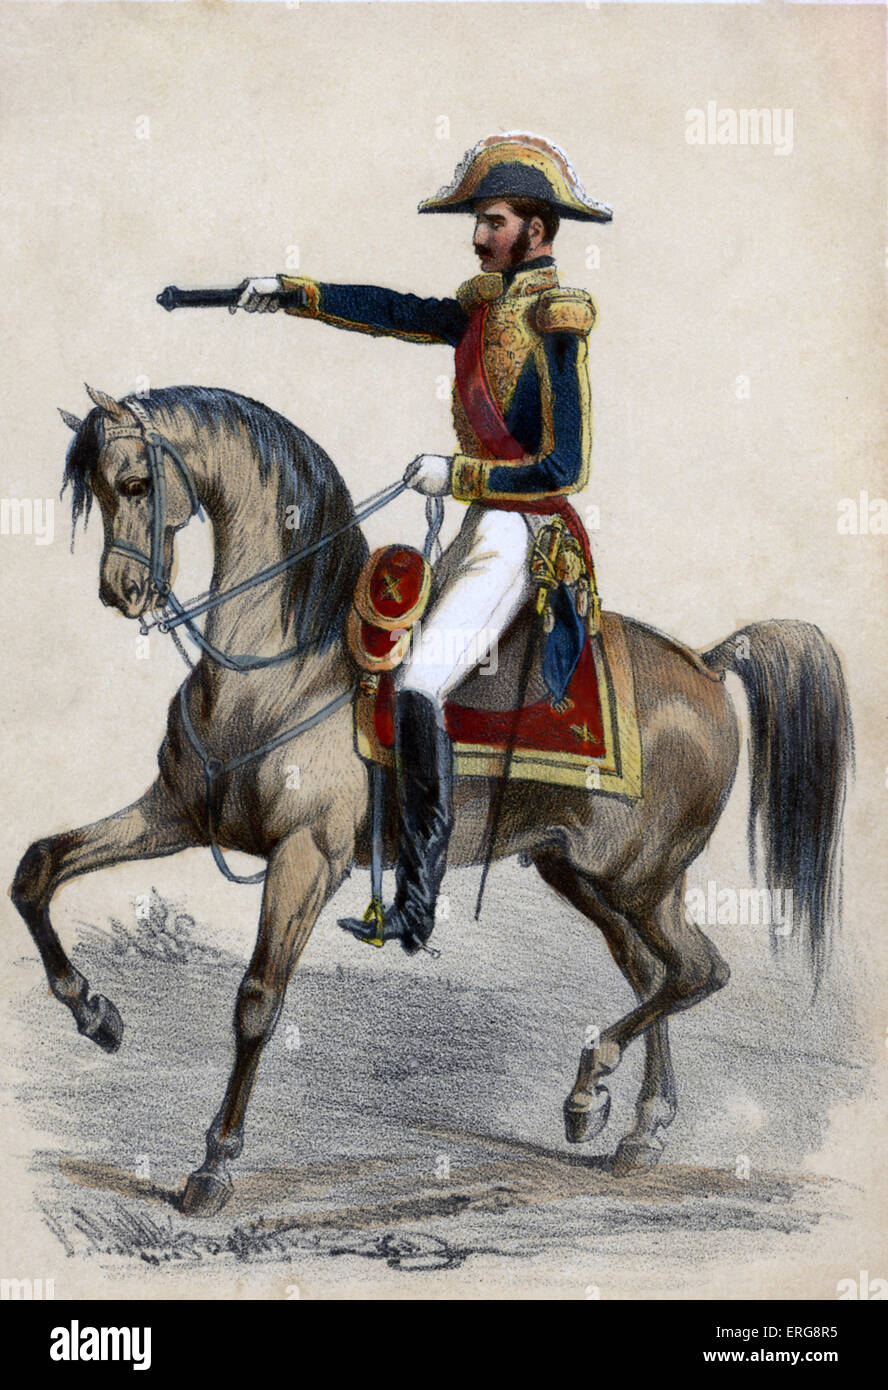 Maréchal de France, here on horseback: Marshal of France - a French military distinction. During the Second Empire, the title Stock Photo